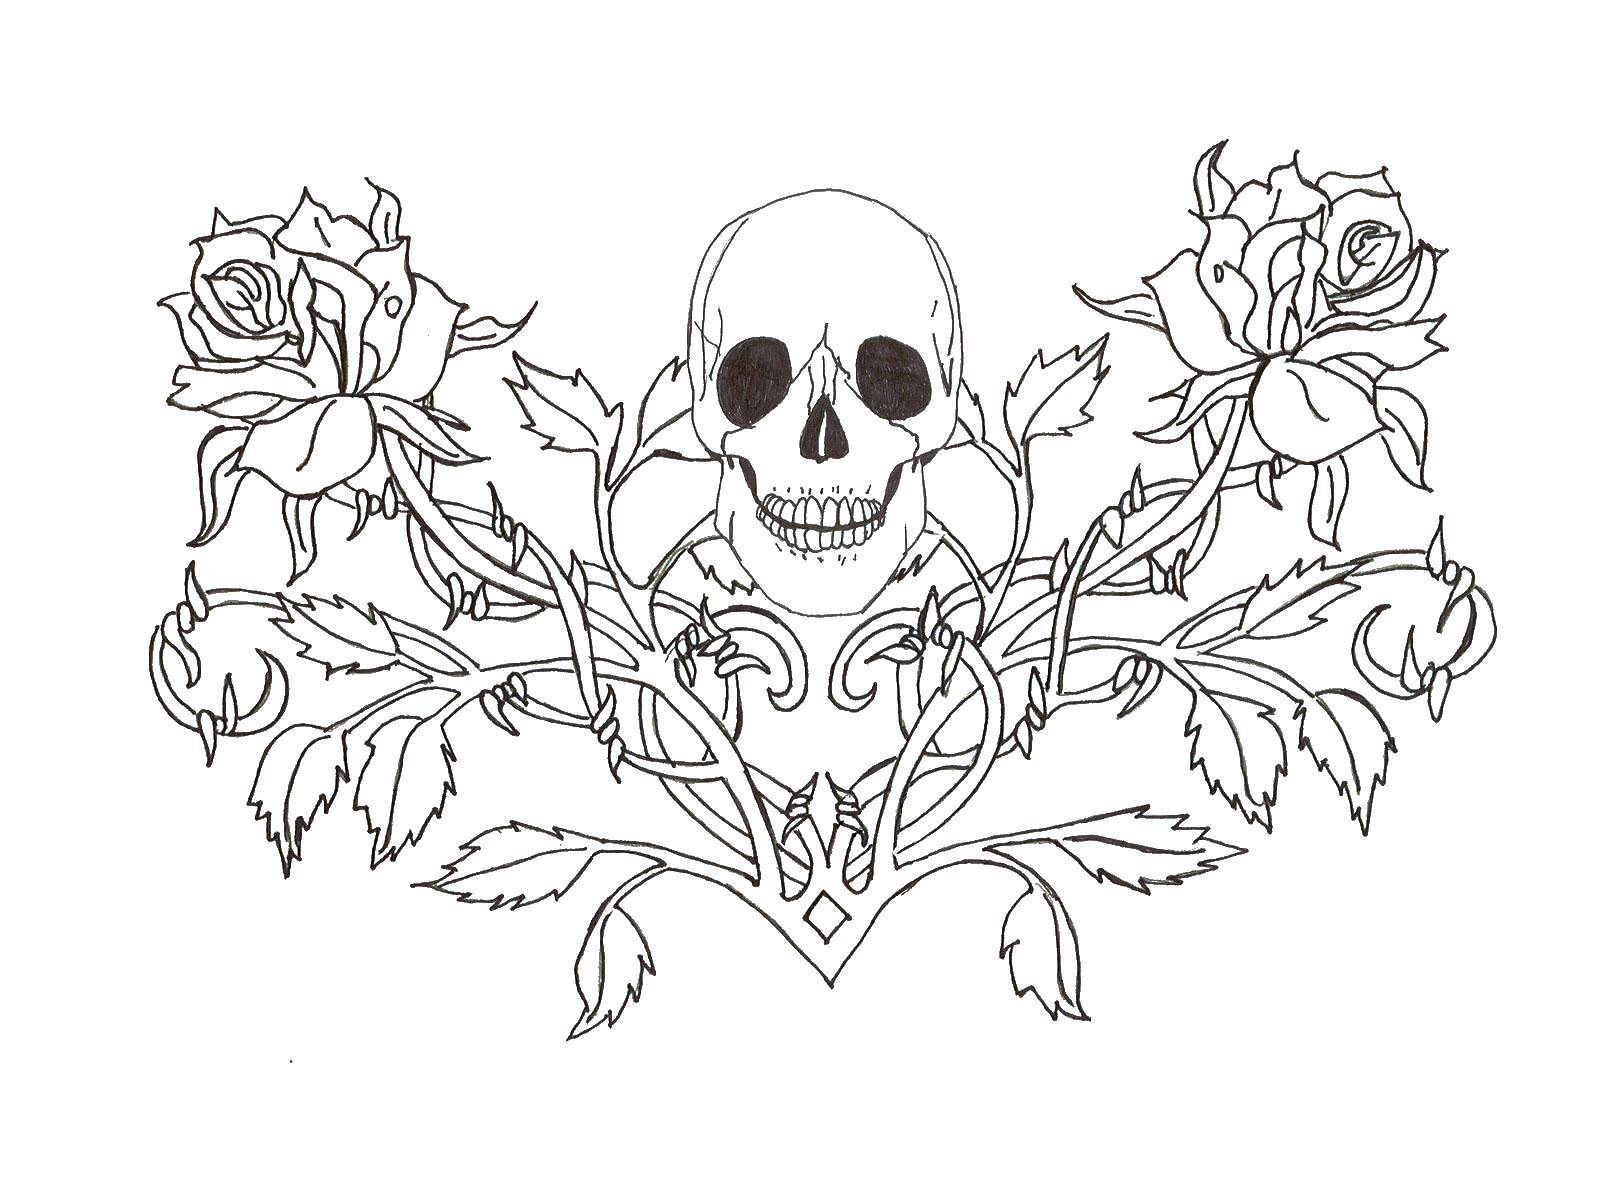 Coloring The skull in the patterns and roses. Category skull. Tags:  skull, patterns, roses.